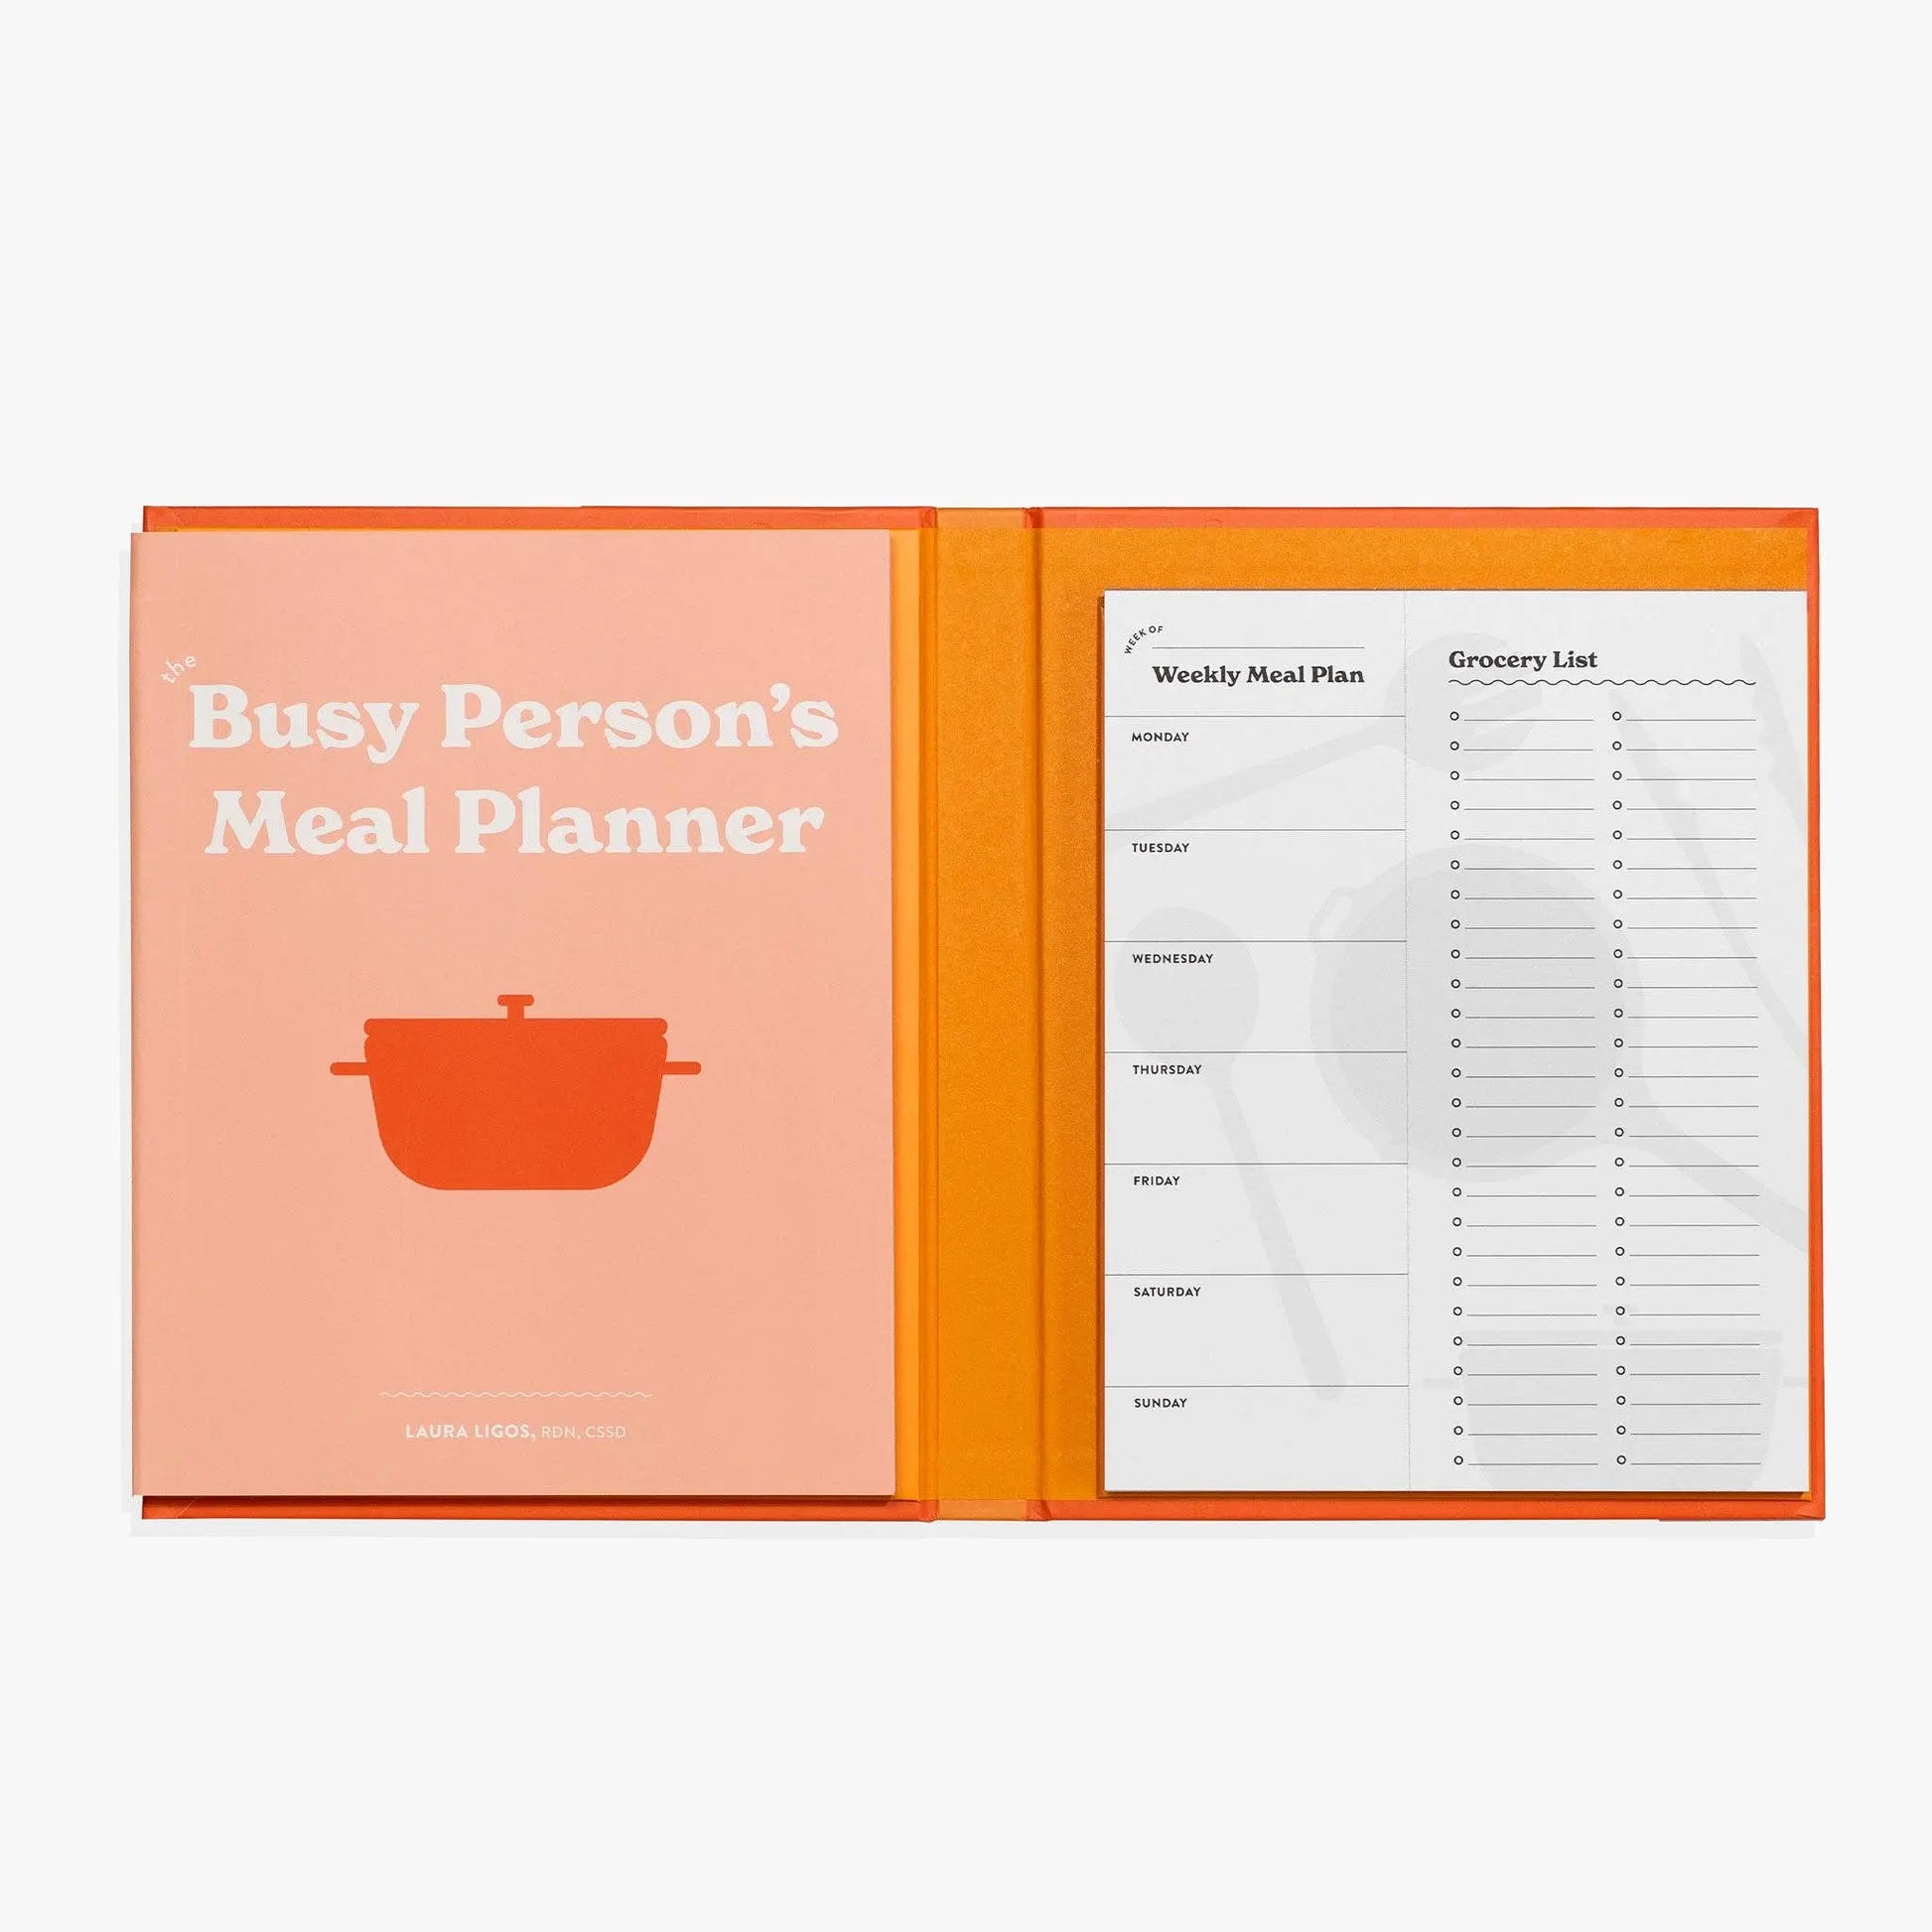 The Busy Person's Meal Planner Paige Tate & Co.